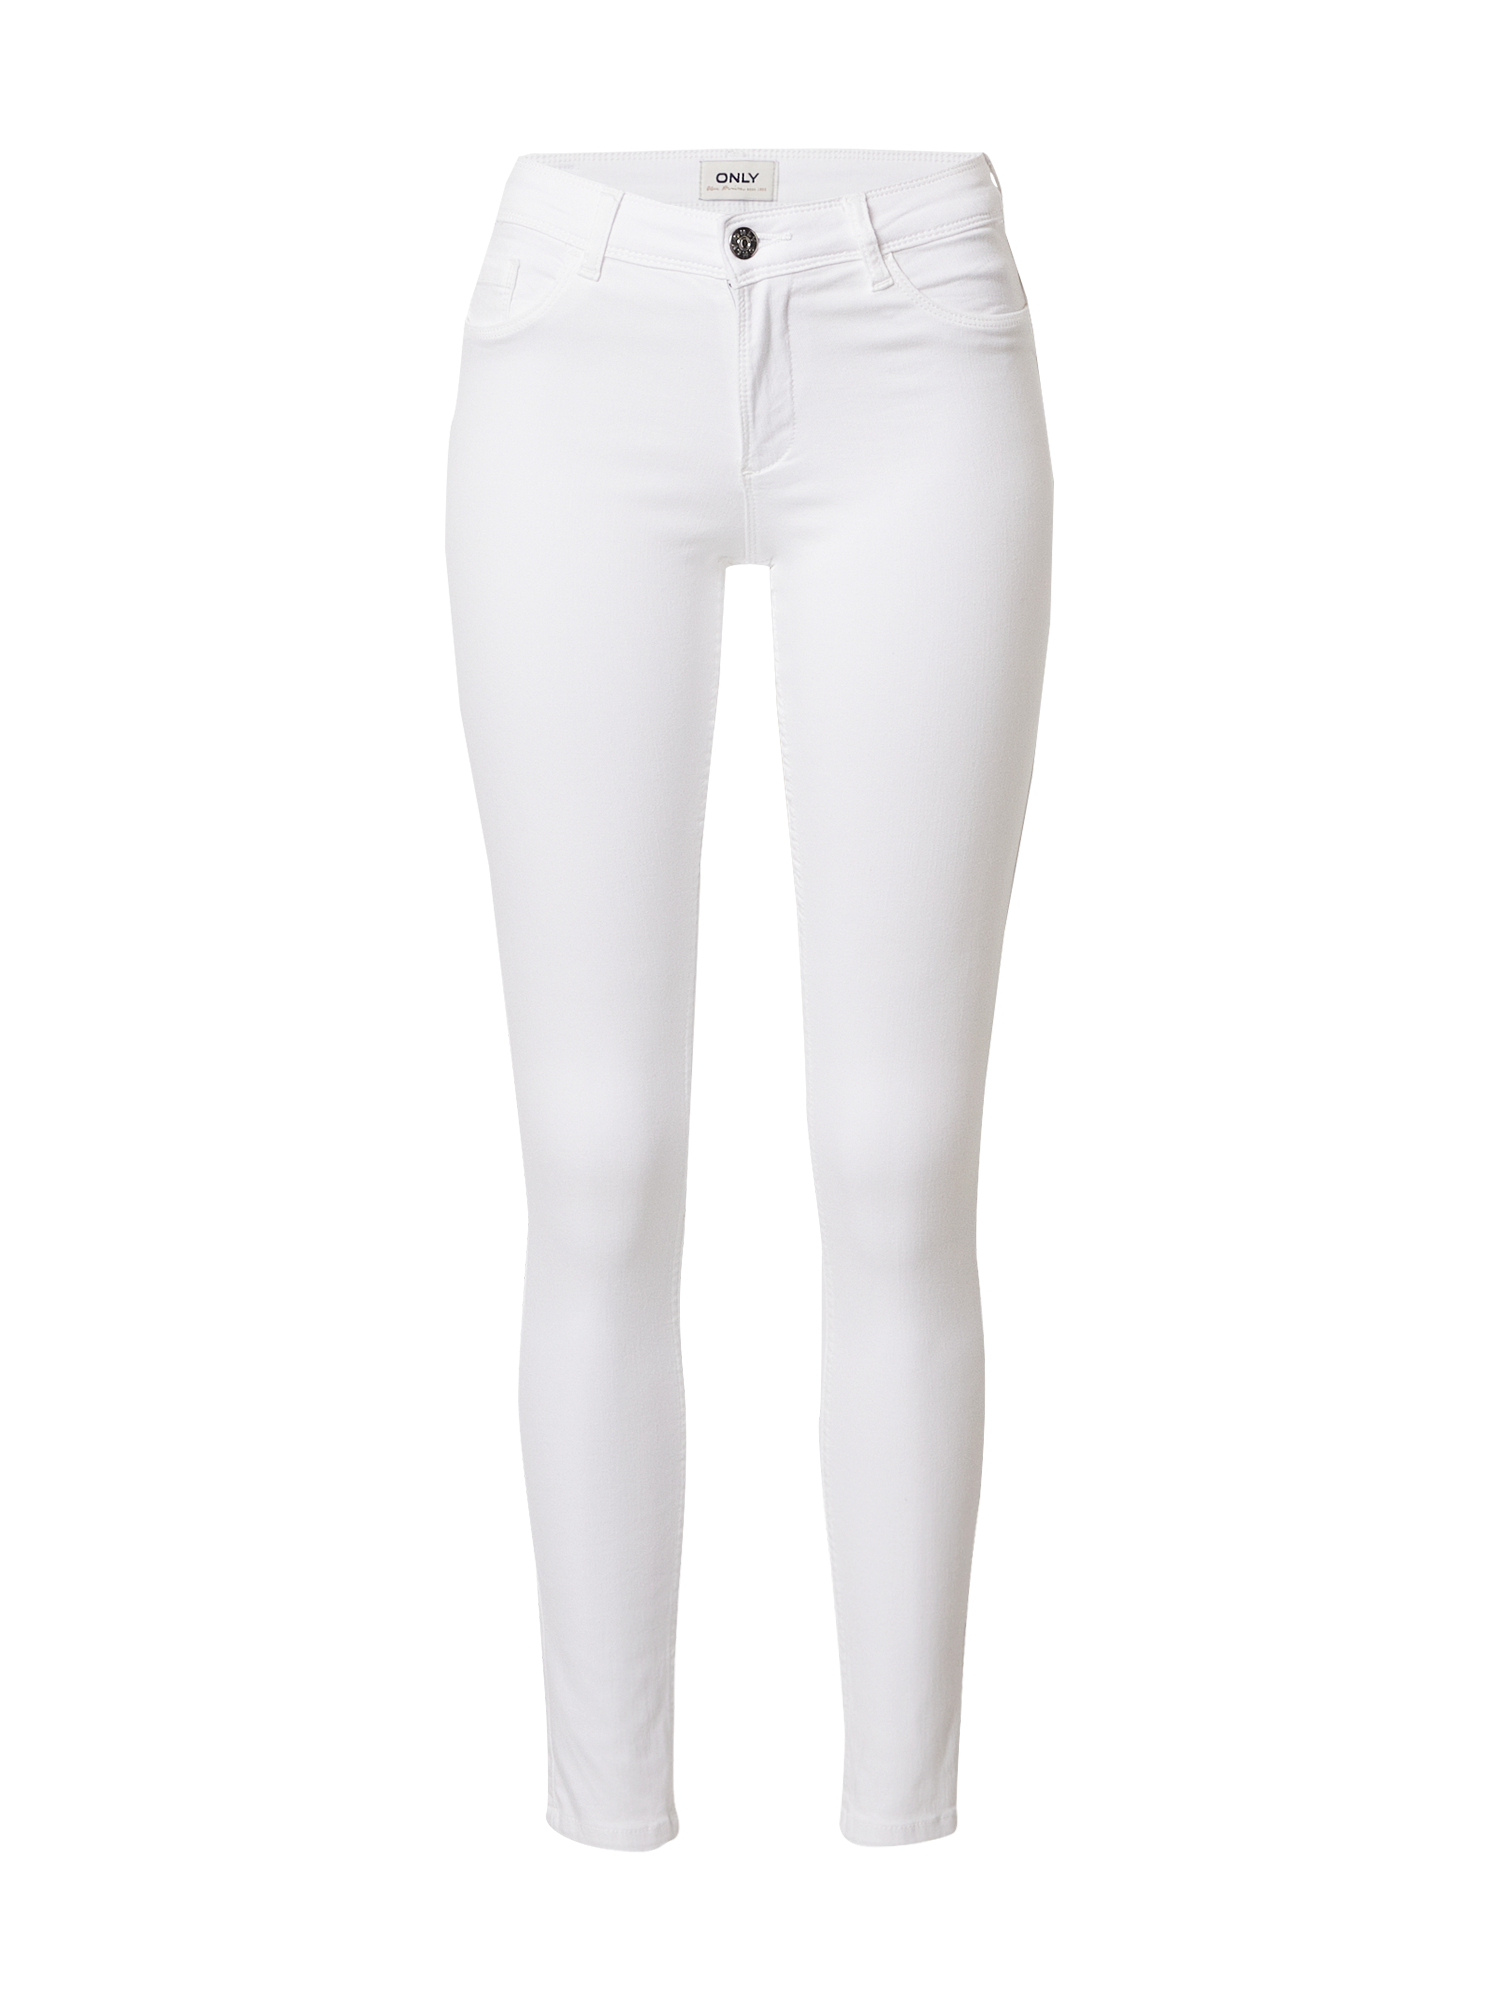 ONLY Jeans ONLULTIMATE KING LIFE REG SK ANA143 in Bianco 